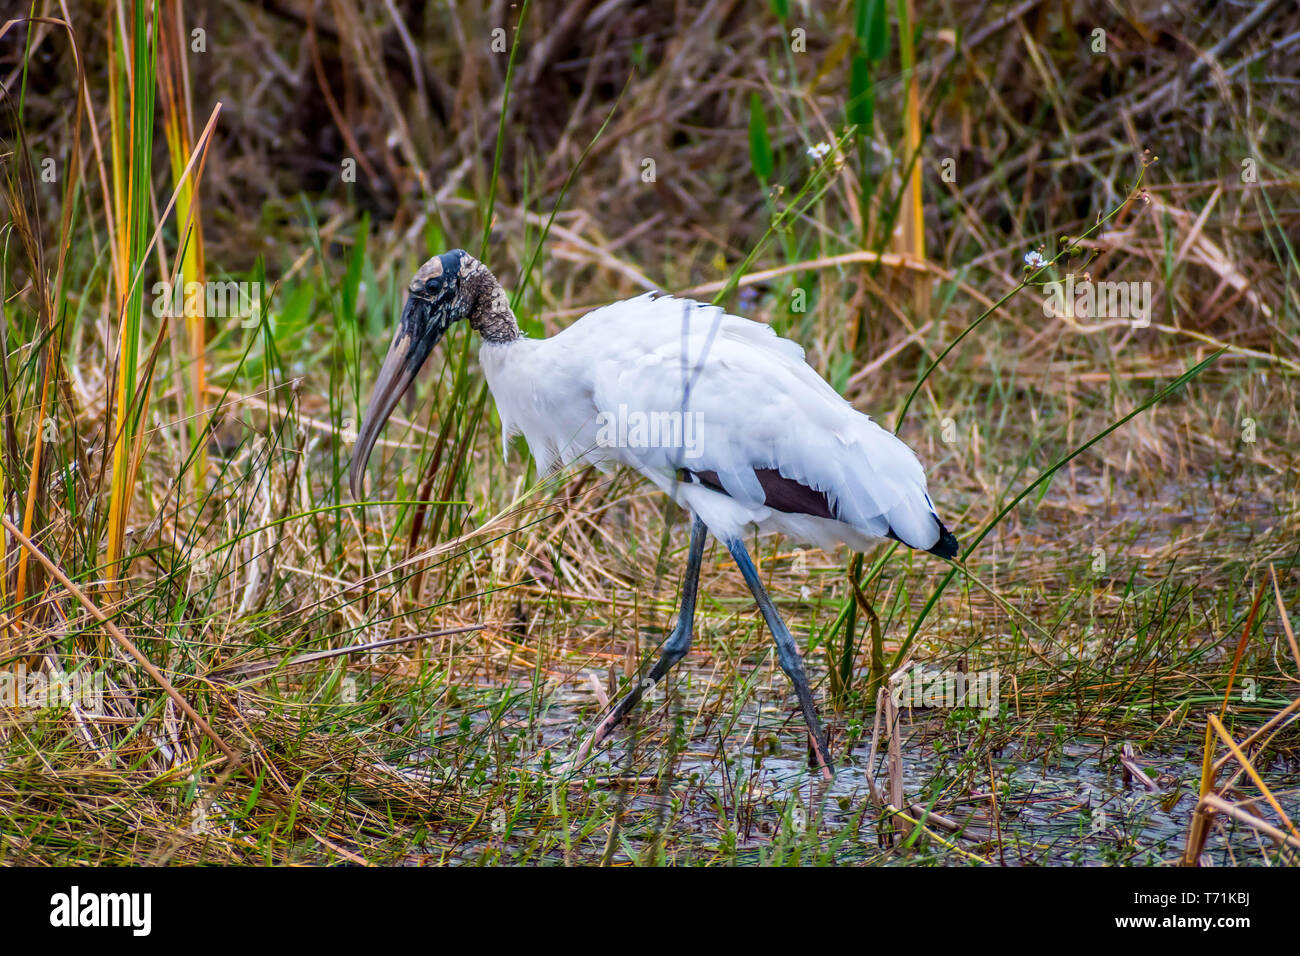 A Black Headed Ibis in Everglades National Park, Florida Stock Photo